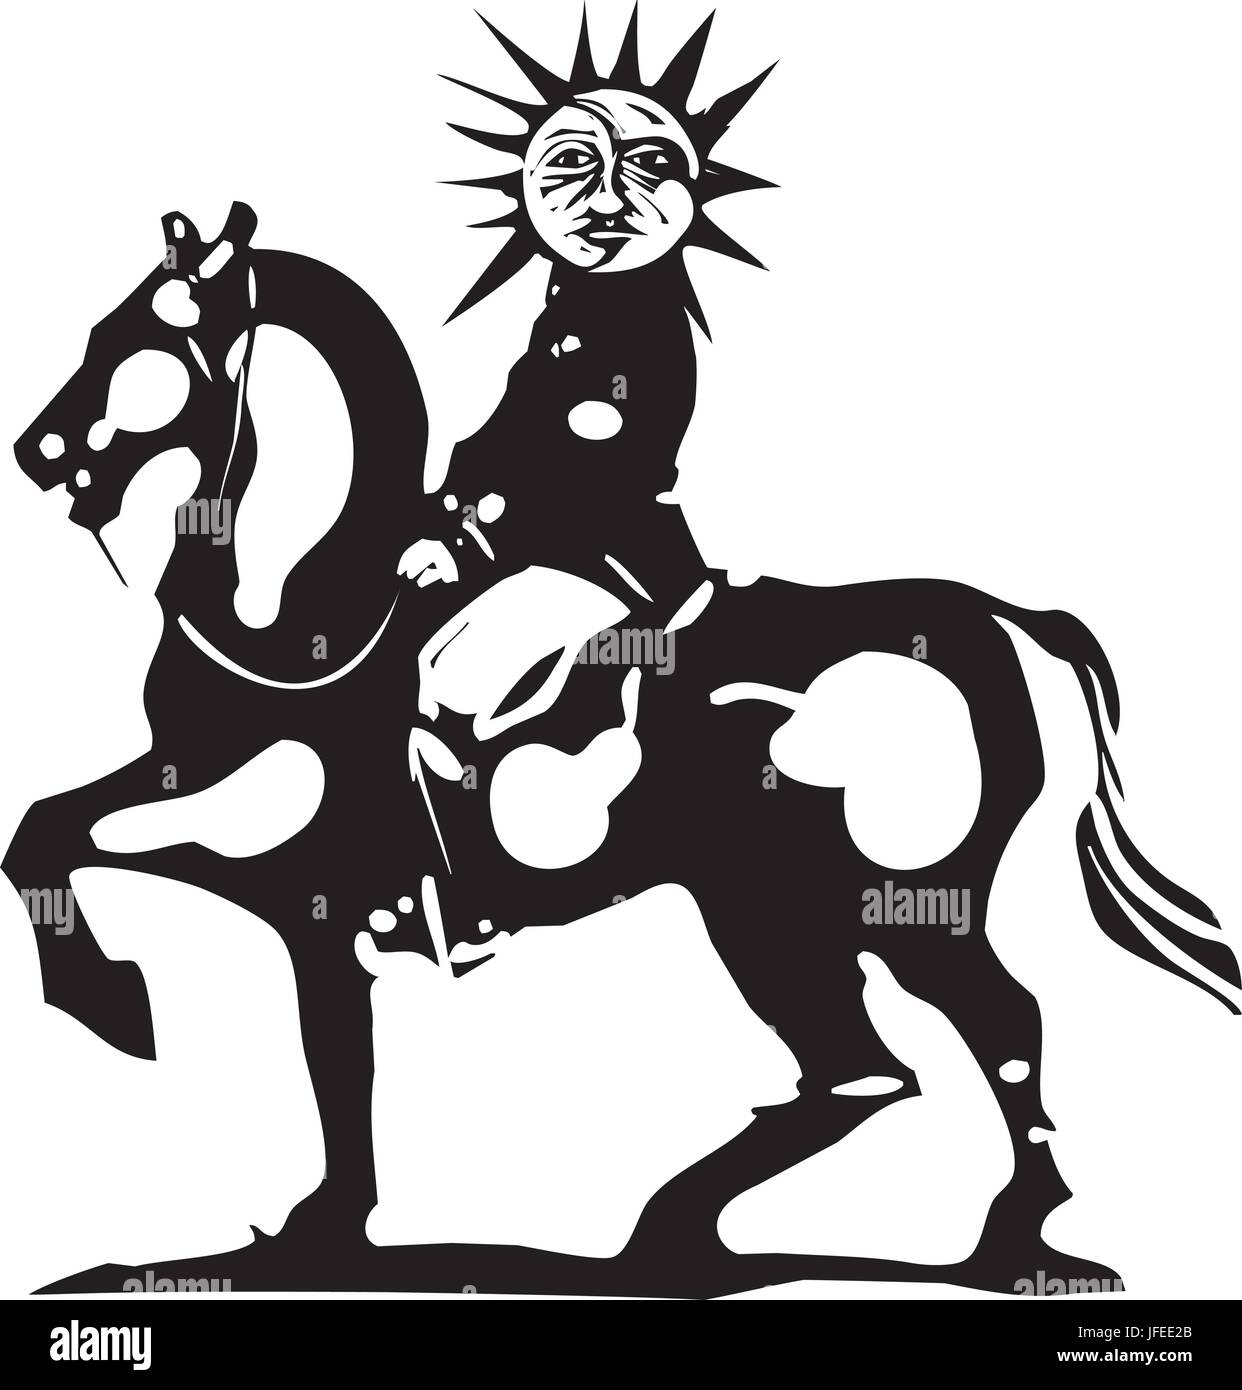 Woodcut style image of a sun and moon face riding on horseback Stock Vector